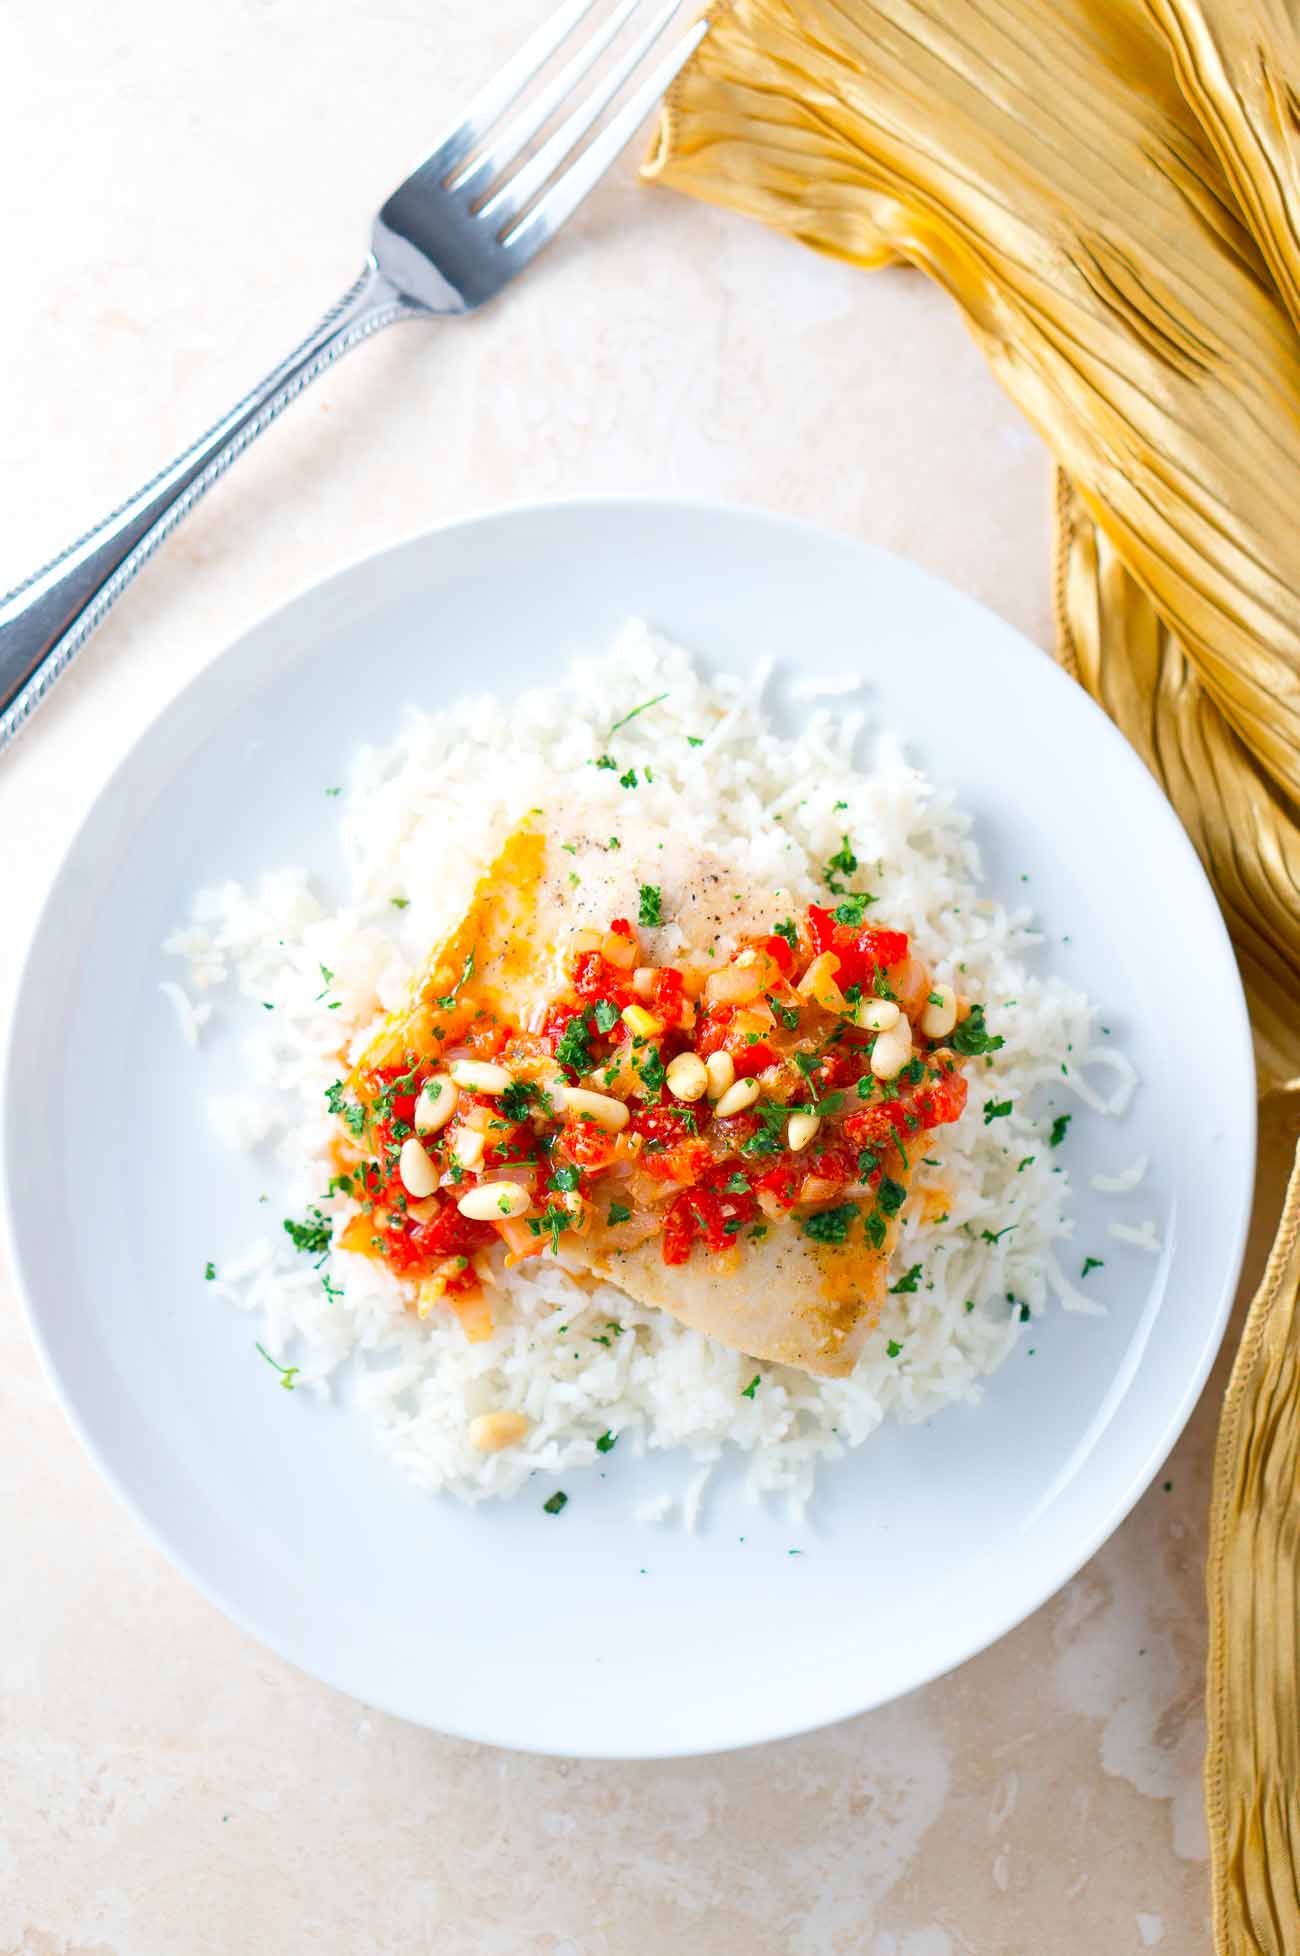 Fish served with a sauce on a bed of rice